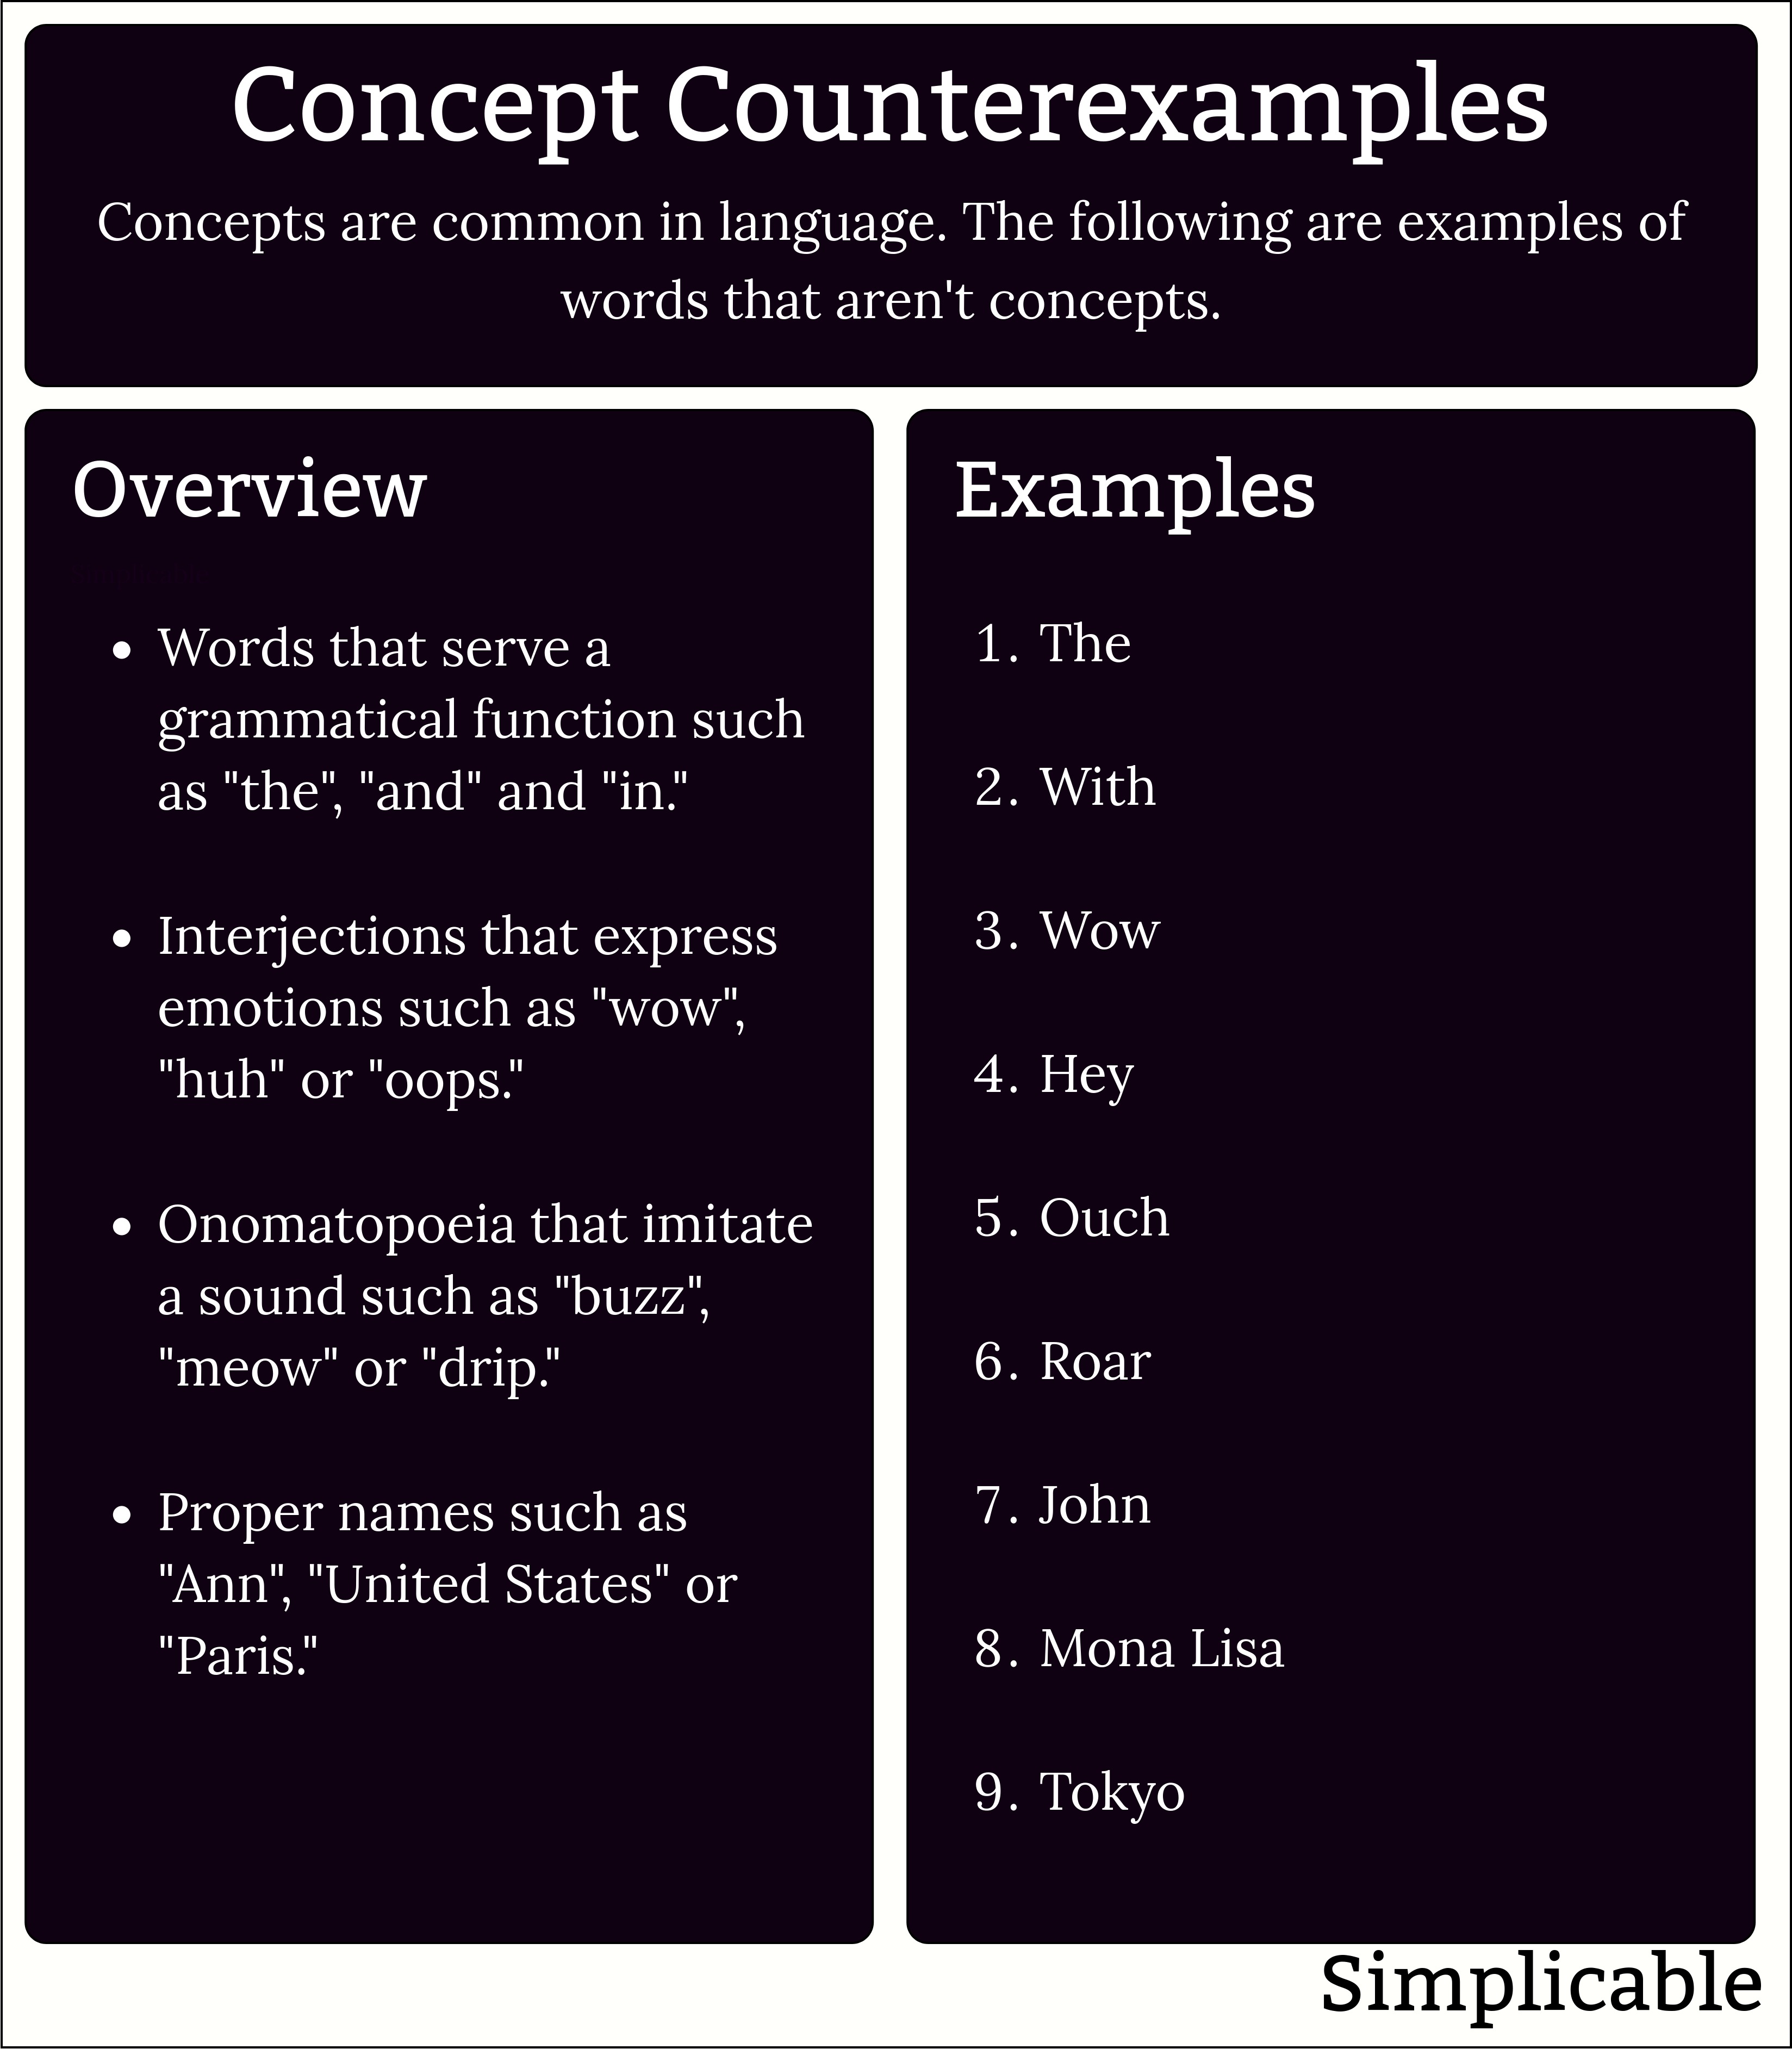 counterexamples of concepts